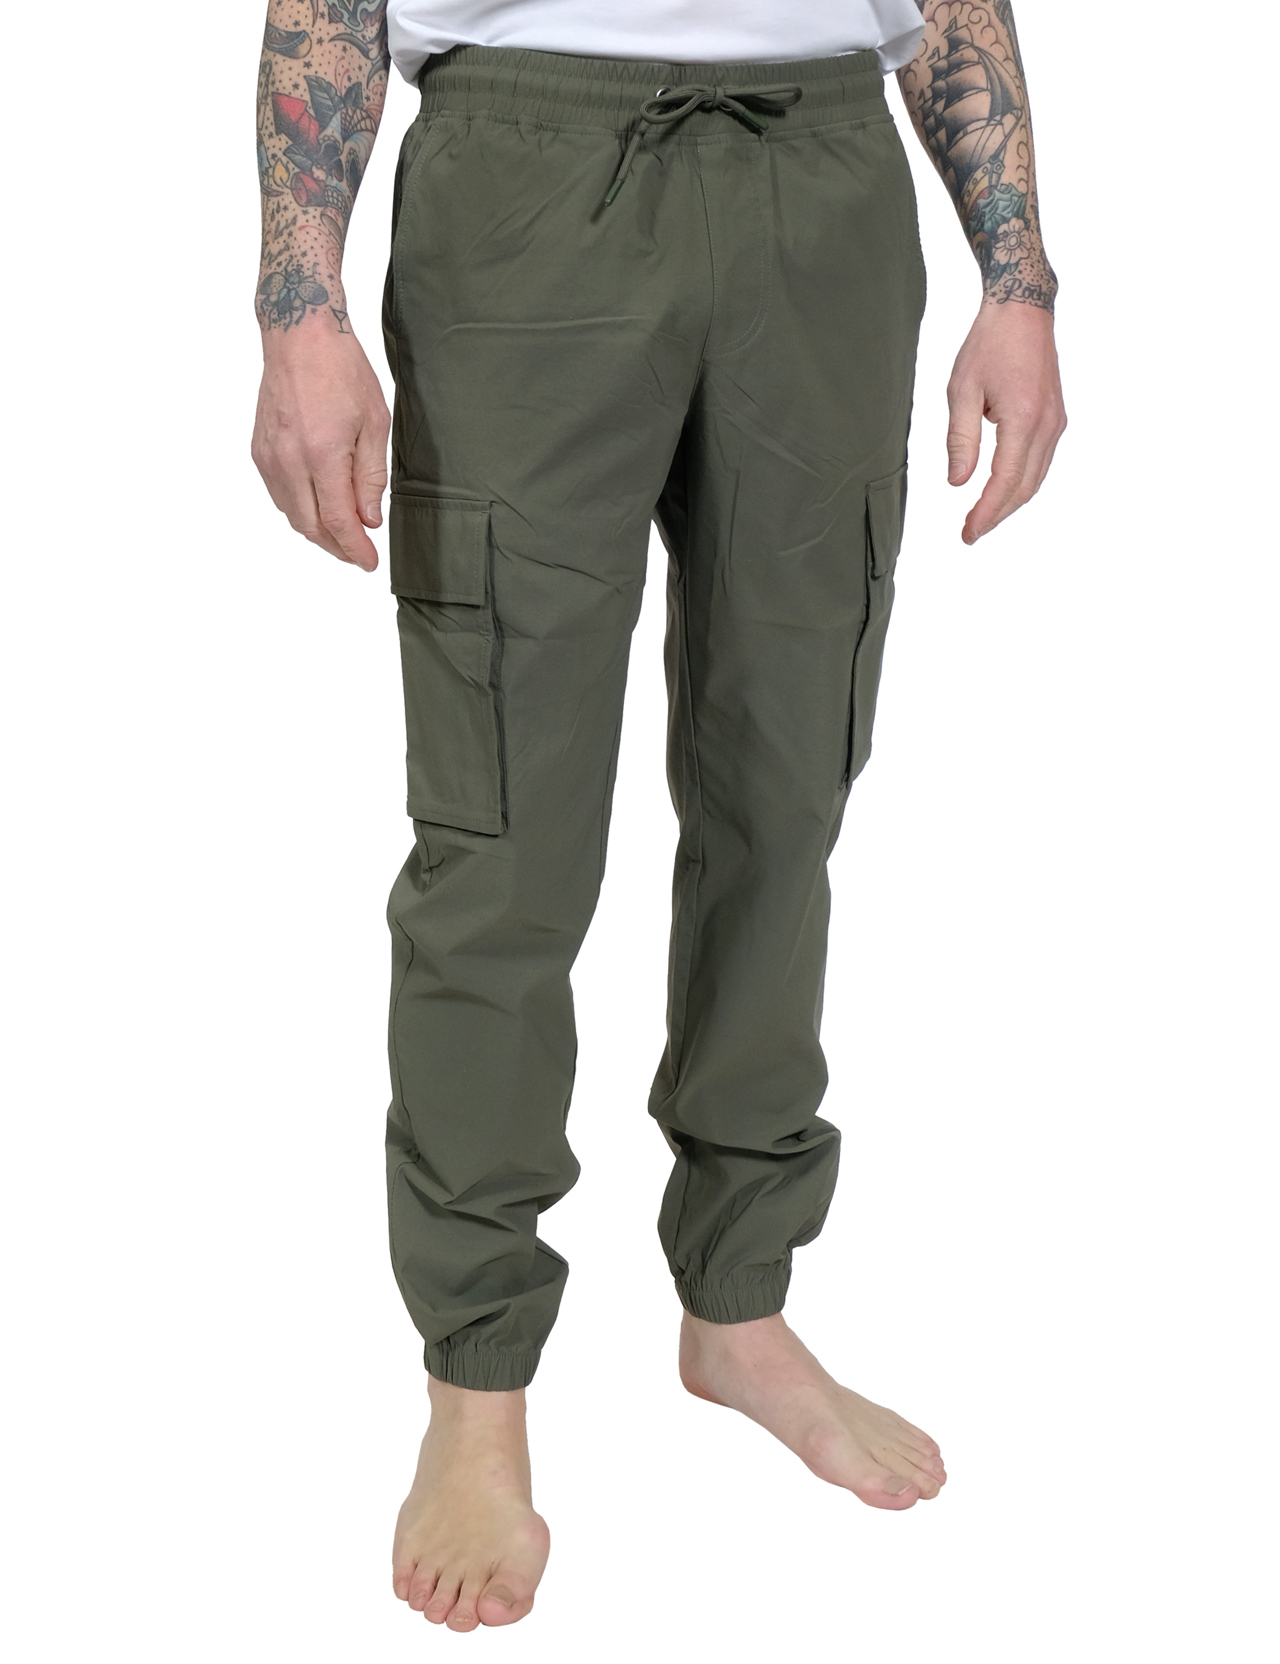 Resterods---Cargo-Pants-Lightweight---Army-1